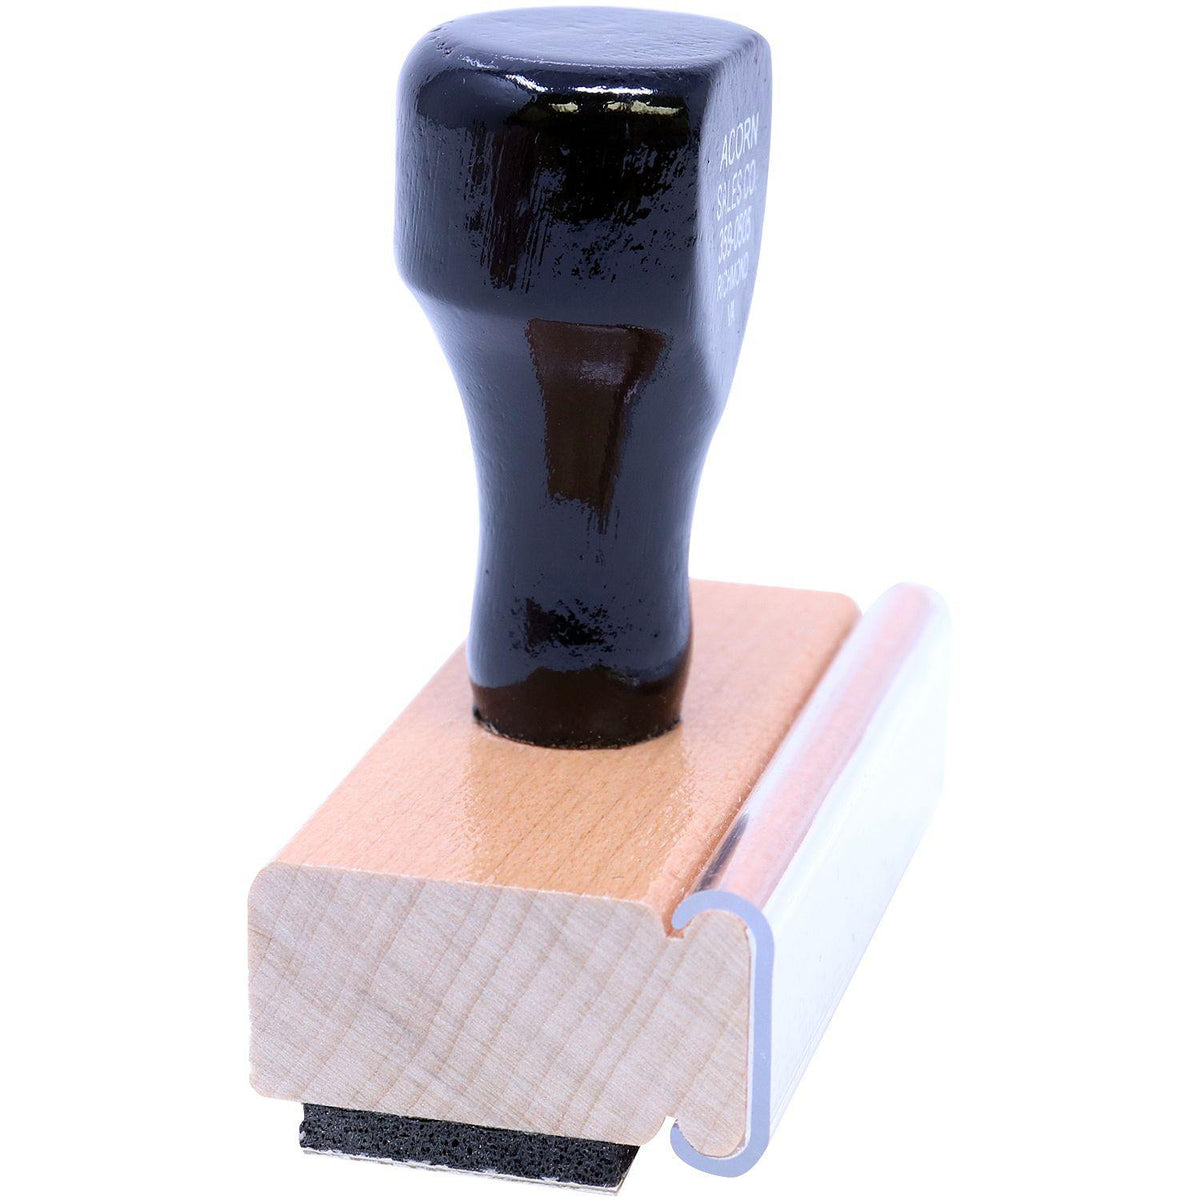 Side View of Large E Mail Rubber Stamp at an Angle